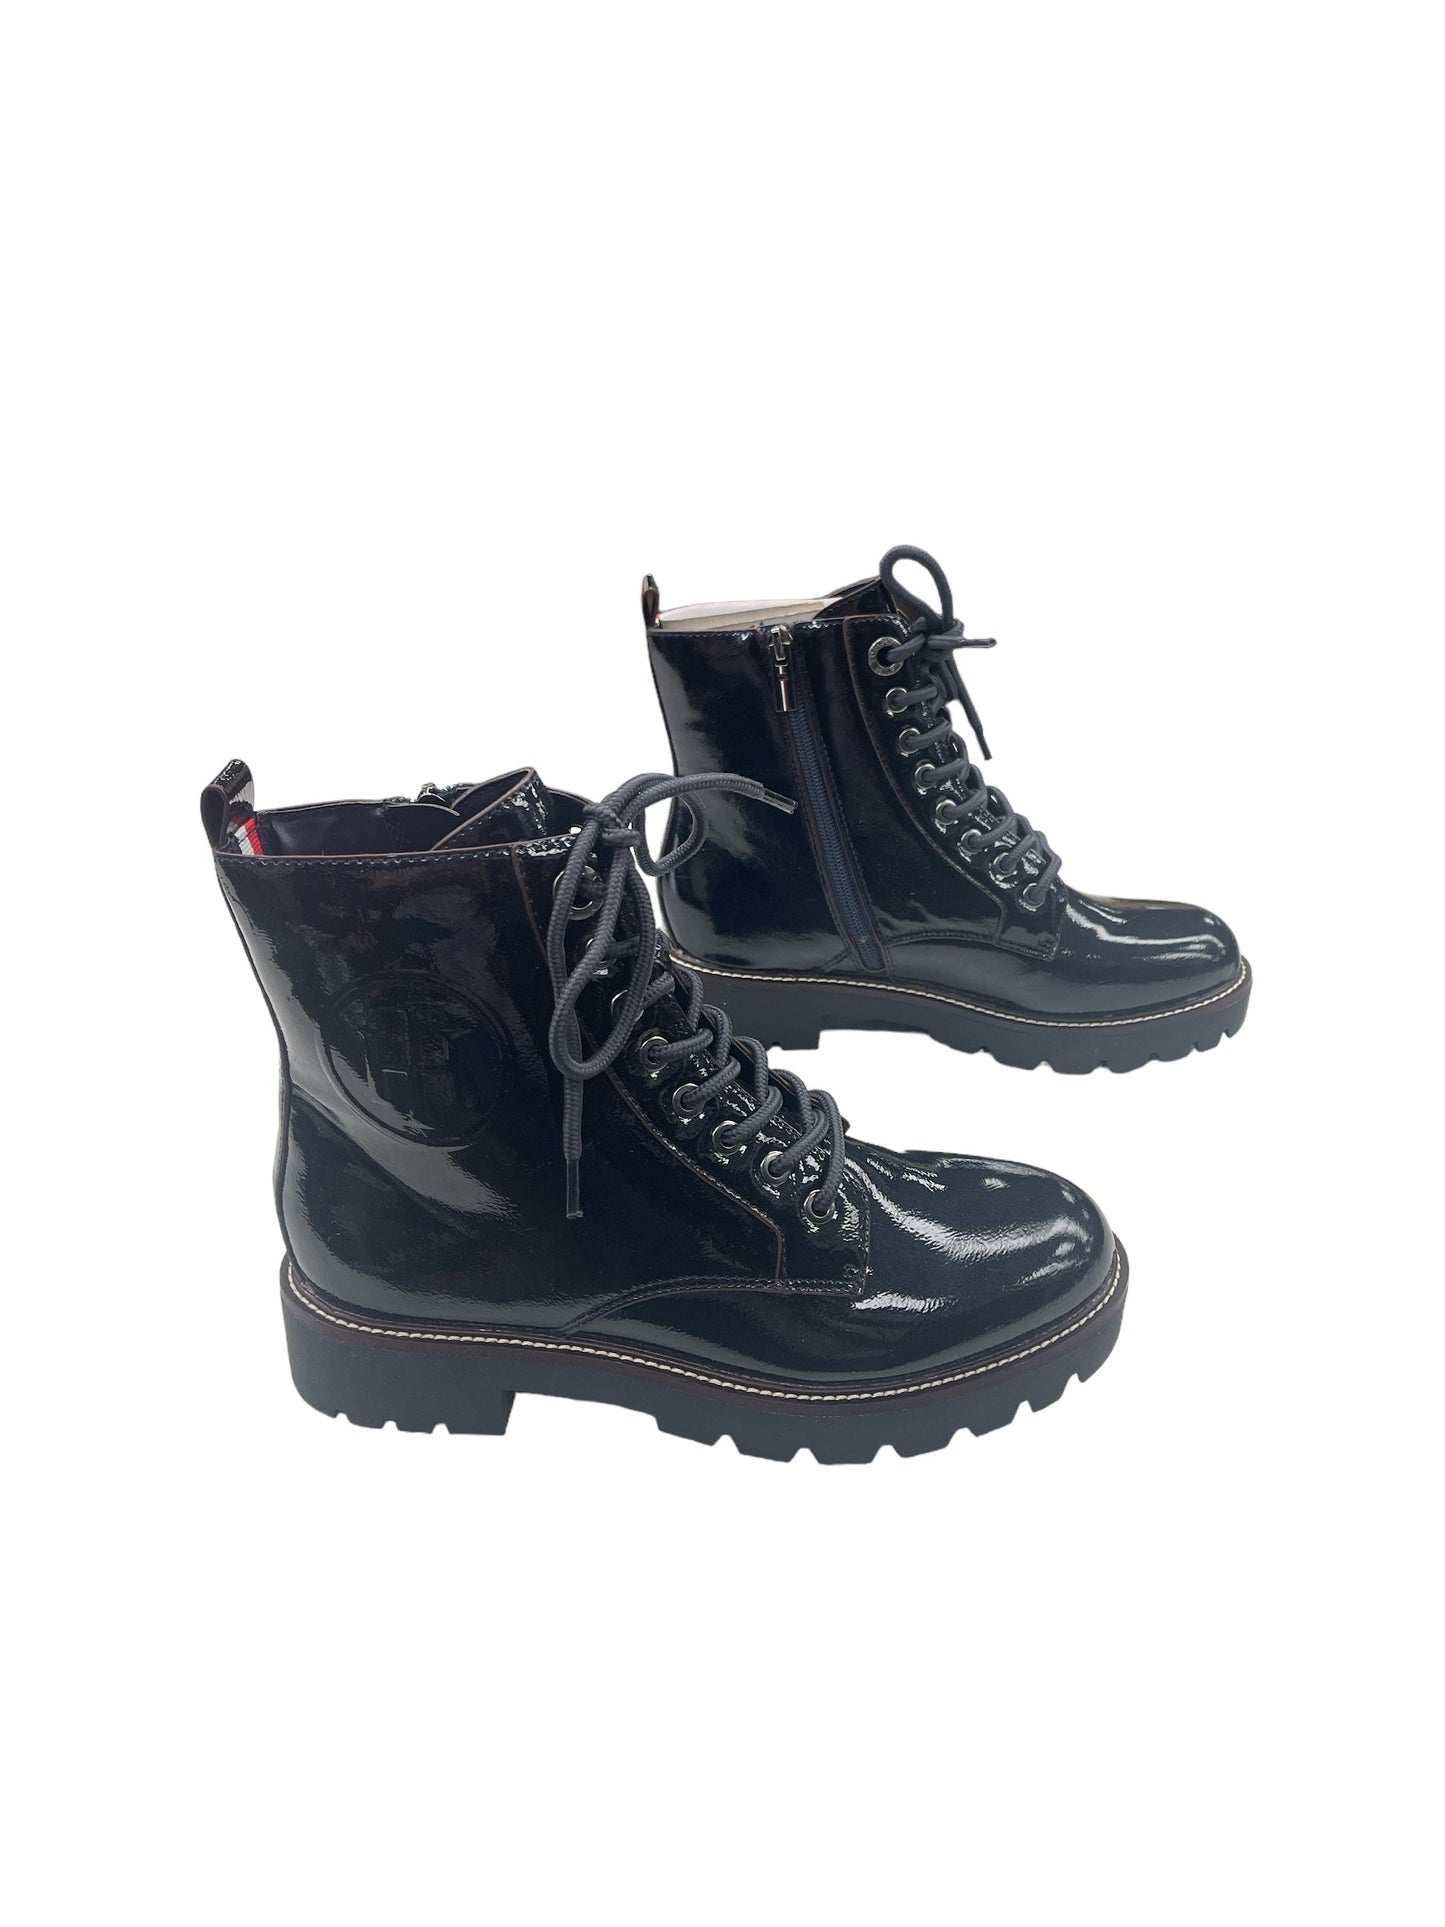 Boots Combat By Tommy Hilfiger  Size: 7.5